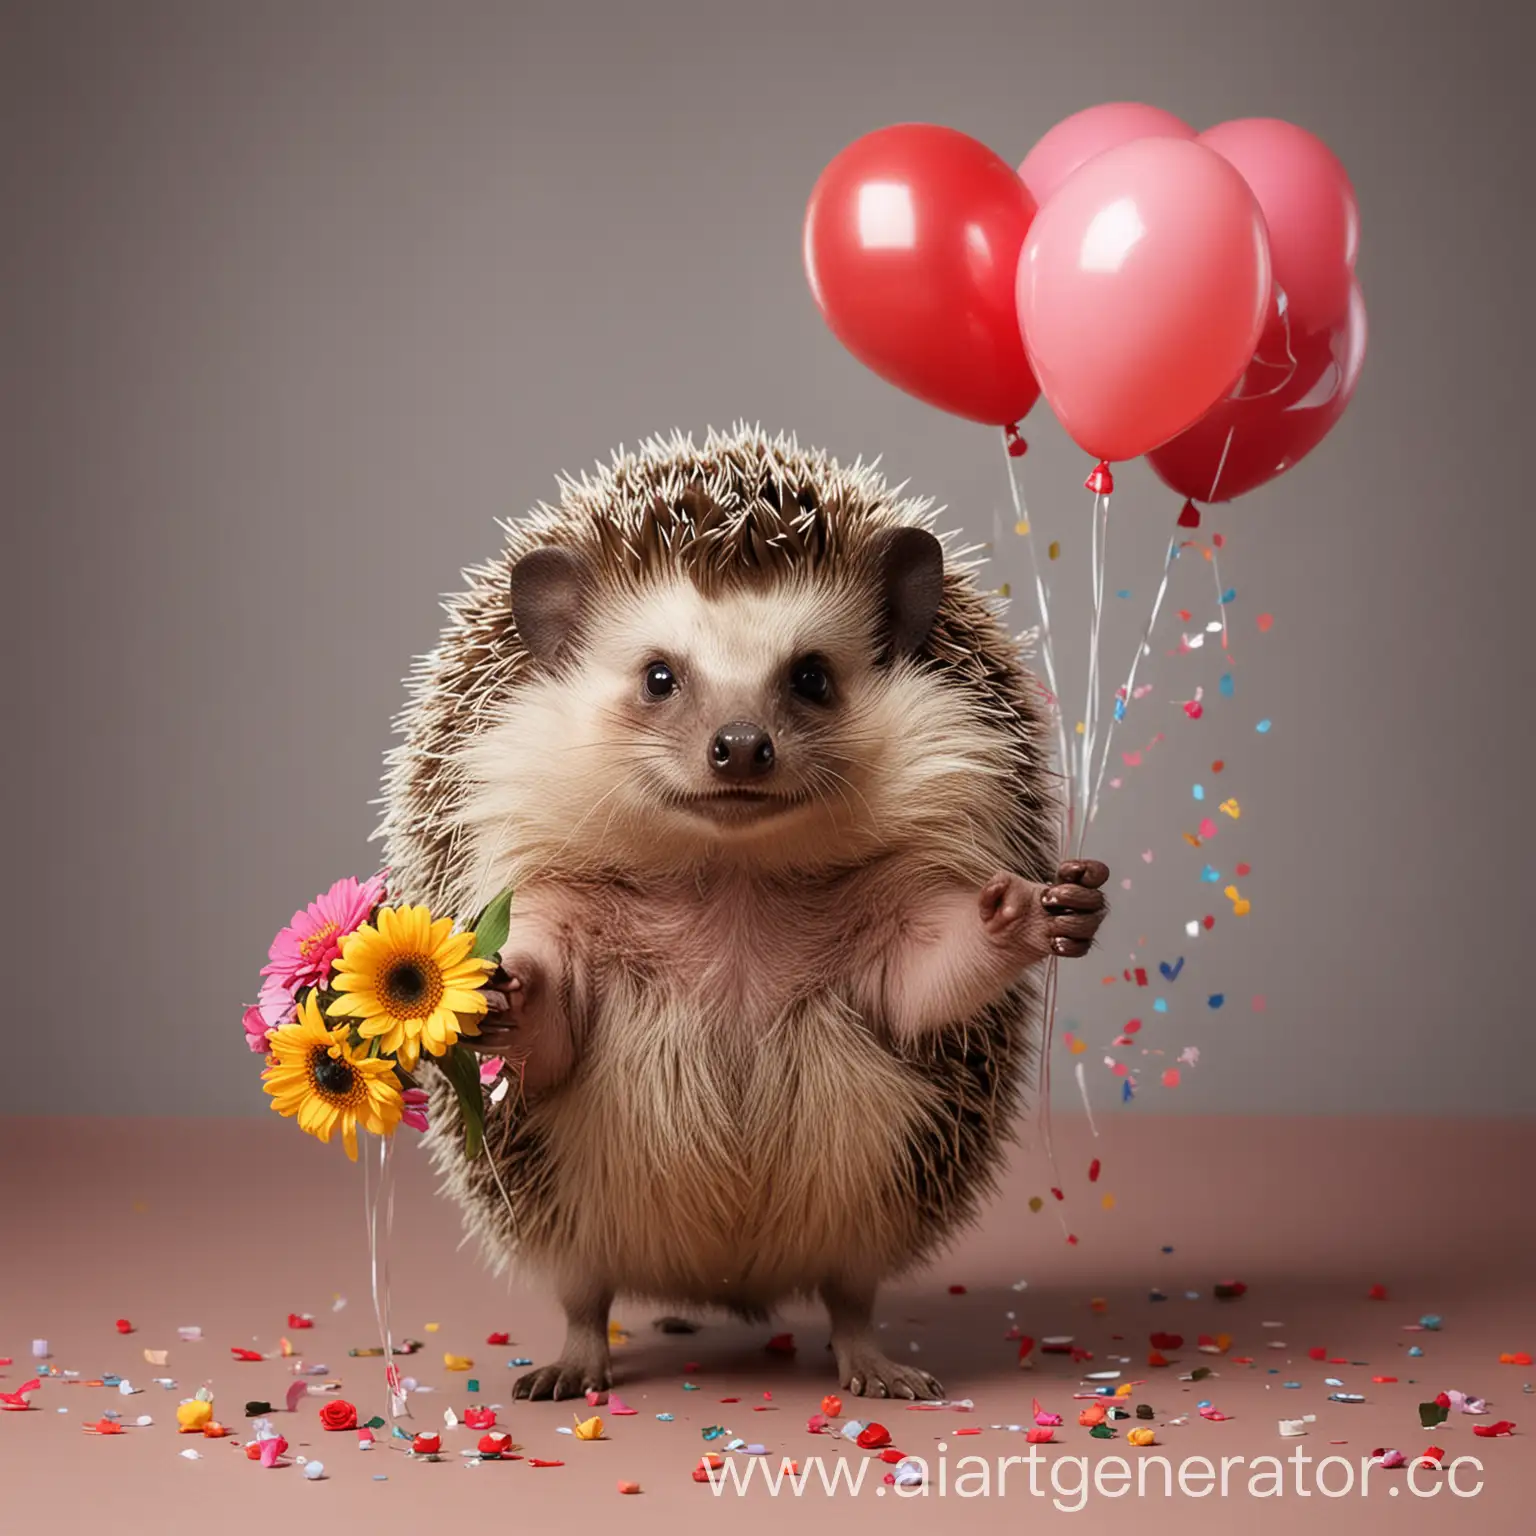 Playful-Hedgehog-with-Flowers-and-Balloons